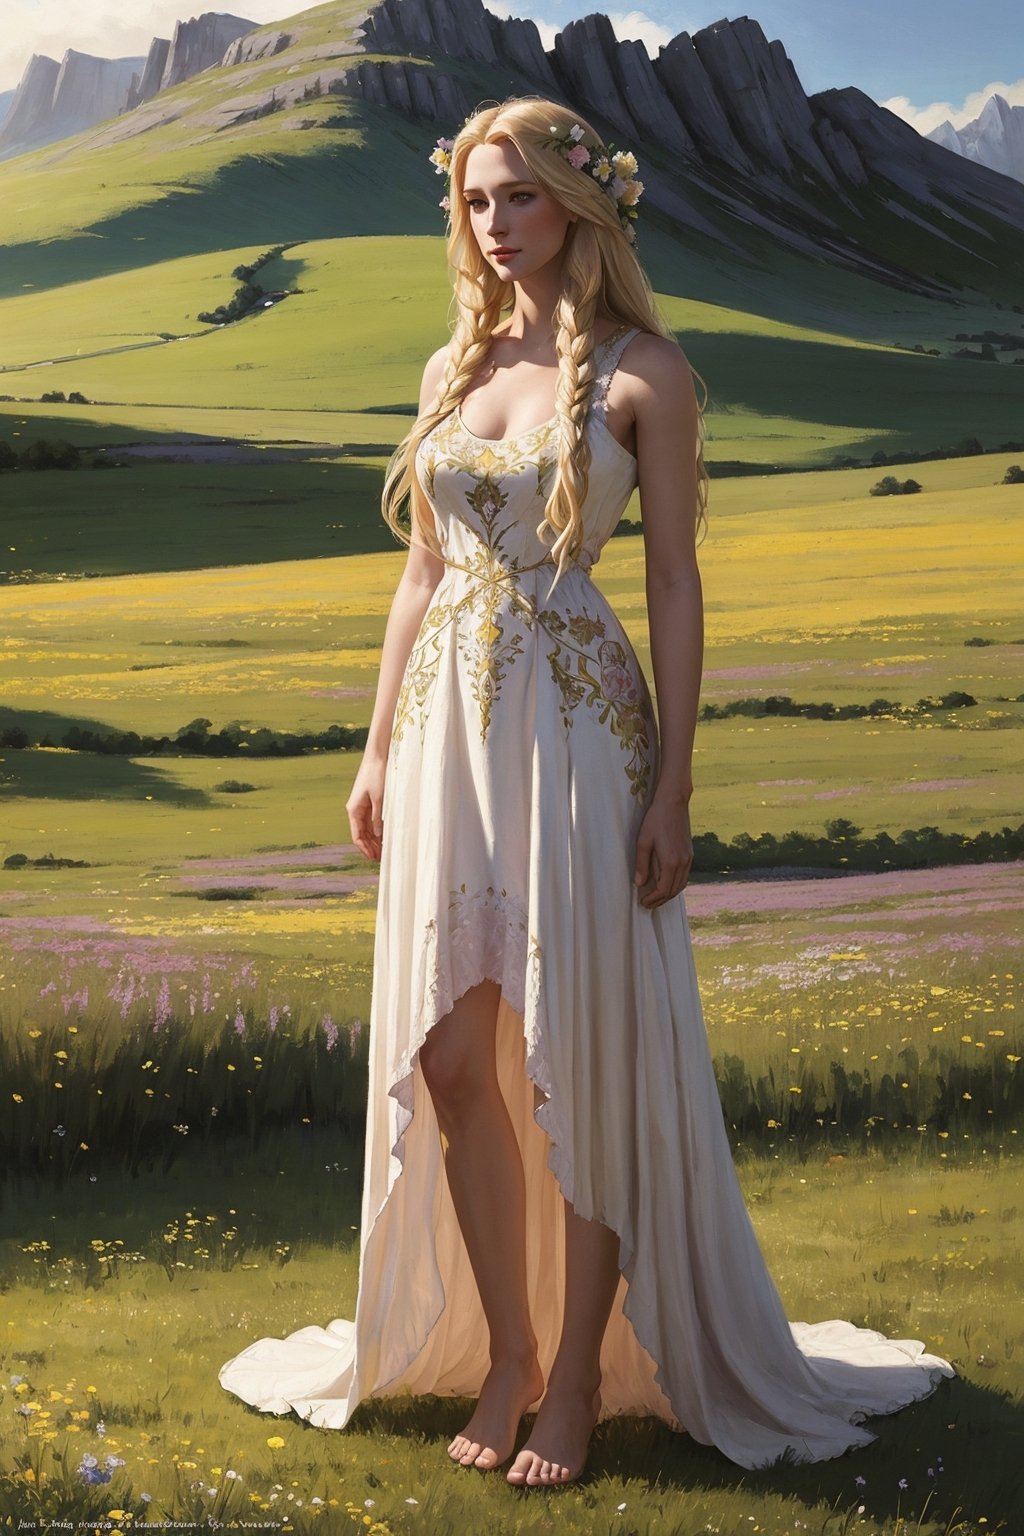 Portrait of a 25-year-old girl with long blonde hair, dressed in a dress made of light material, barefoot, standing in a meadow among flowers, looking at viewer,
 brom's art, depiction of an epic fantasy character, portrait of a character, fantasy art, works by Richard Schmid, A.Mukha, Volegov, impressionism